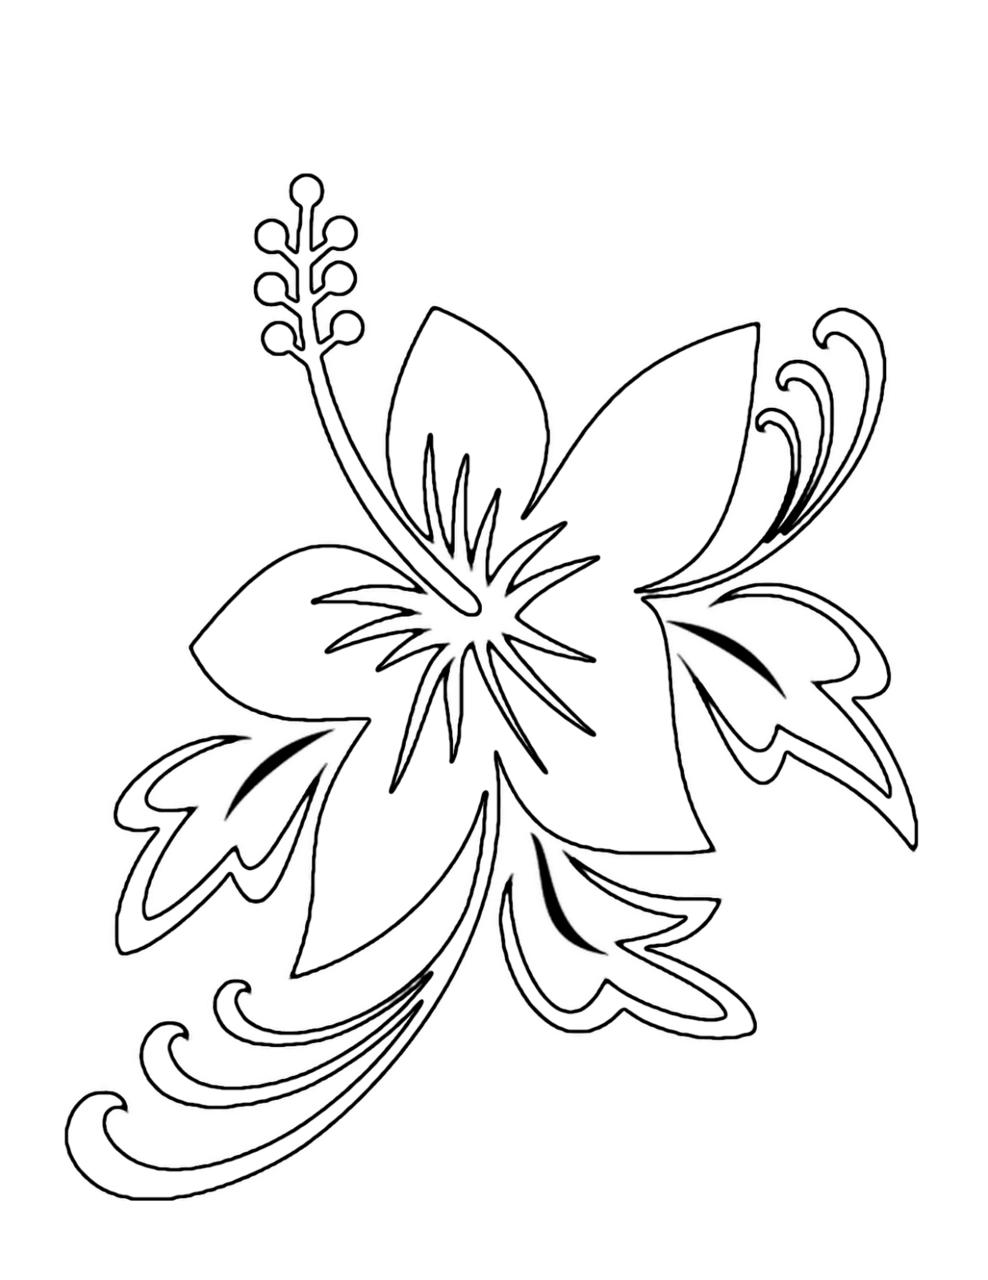 Flower Colouring Pages Printable